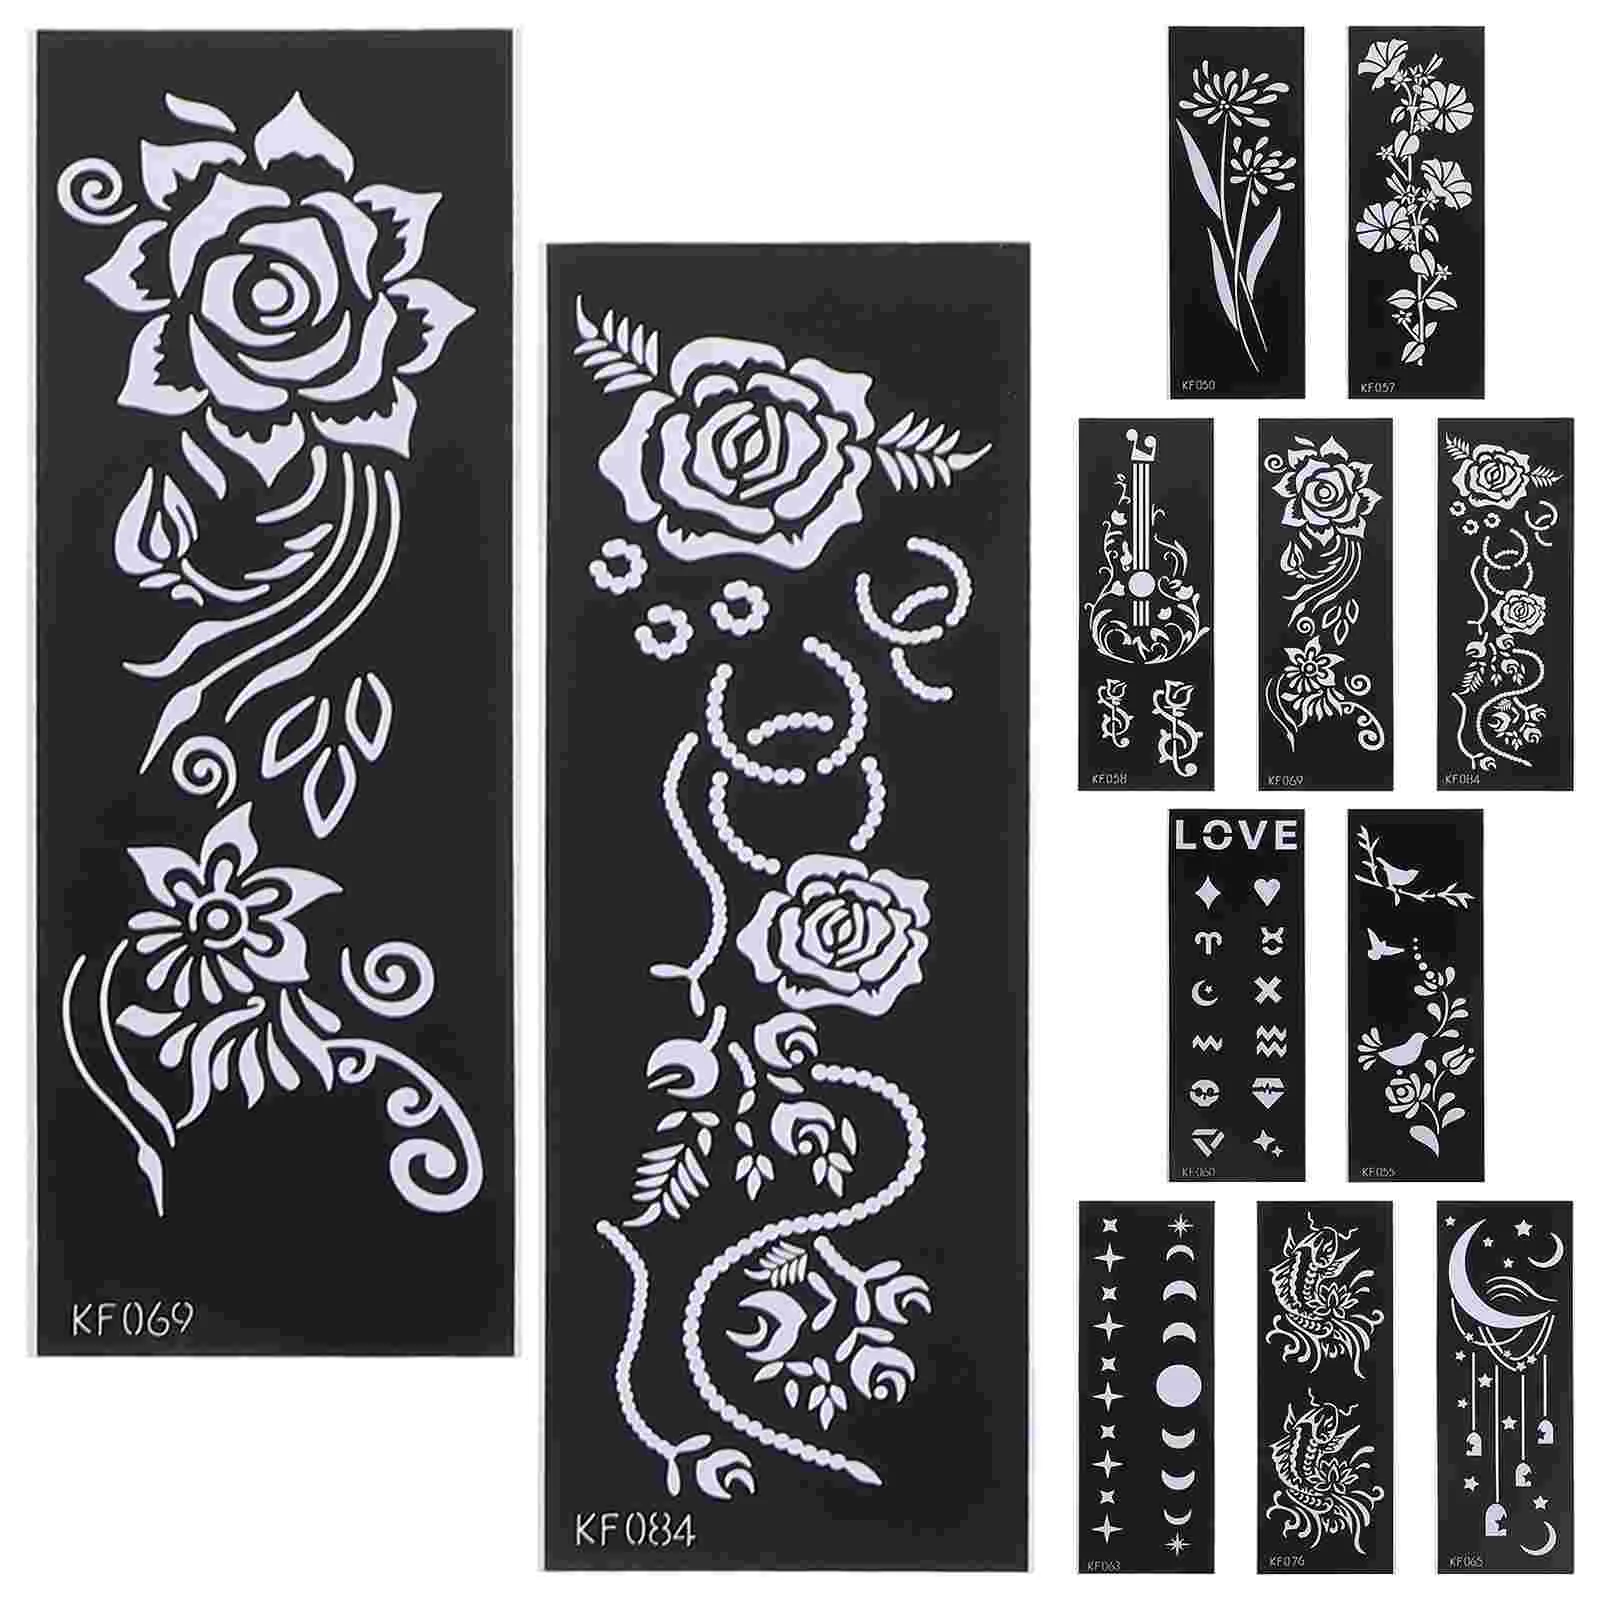 

12 Sheets Hollow Out Template Tattoos Stencils Daily Flower Molds Delicate Templates Spray DIY Decor Portable Painted Small